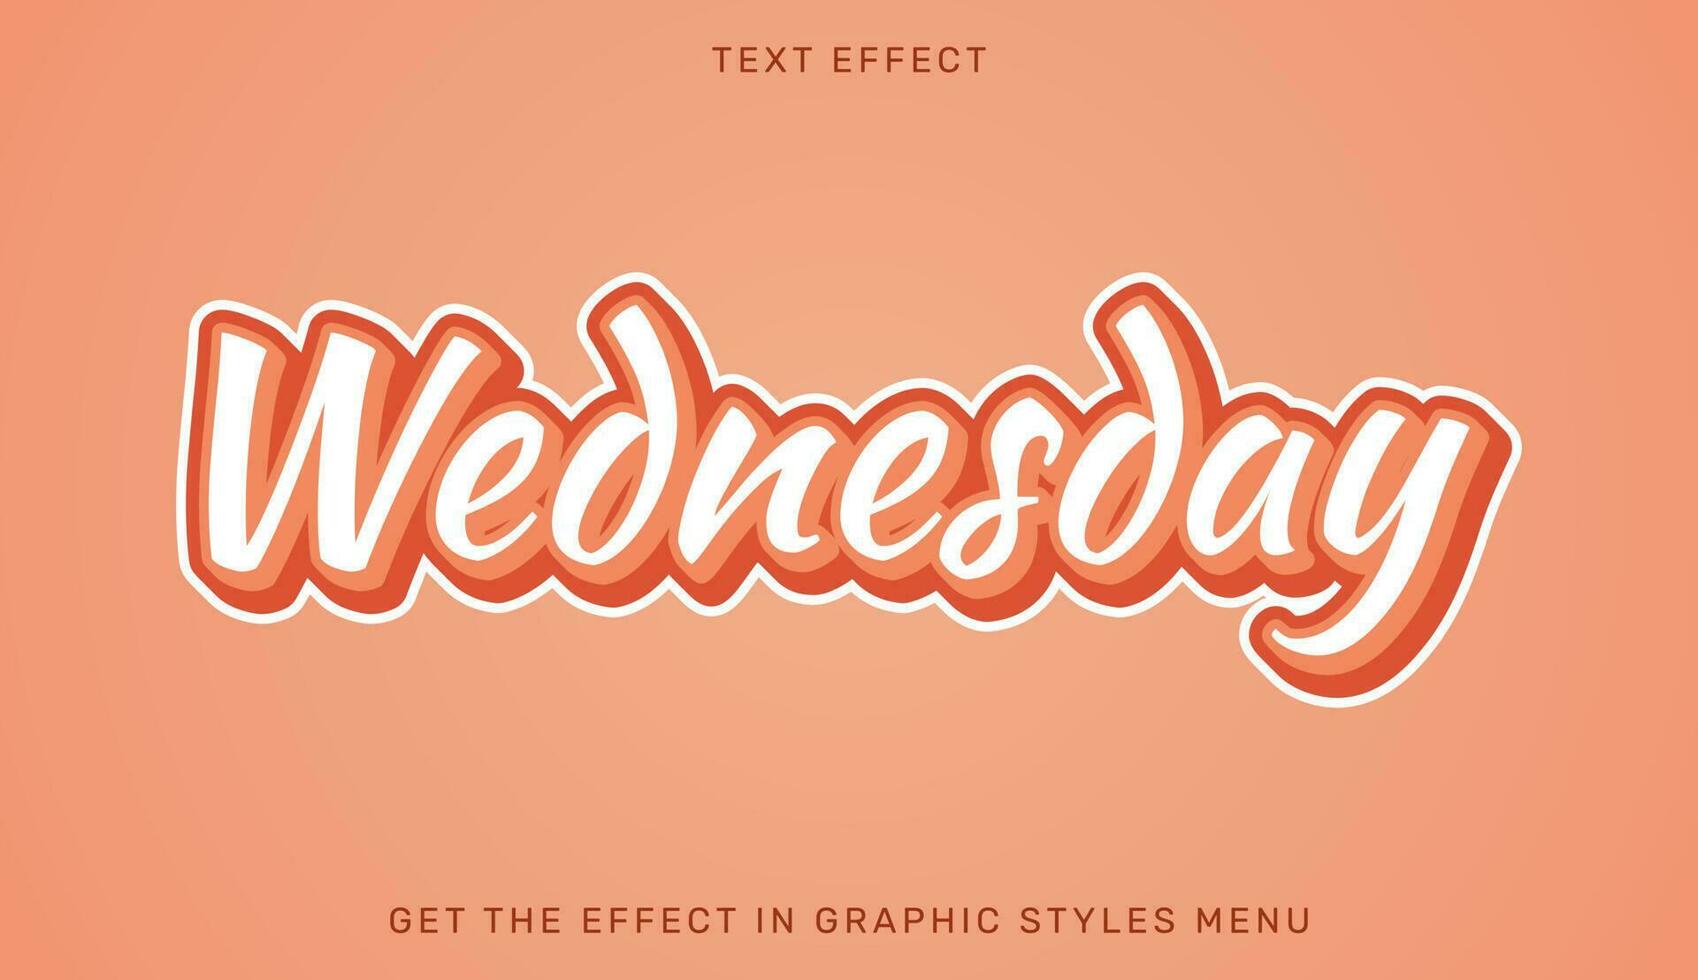 Wednesday editable text effect in 3d style vector